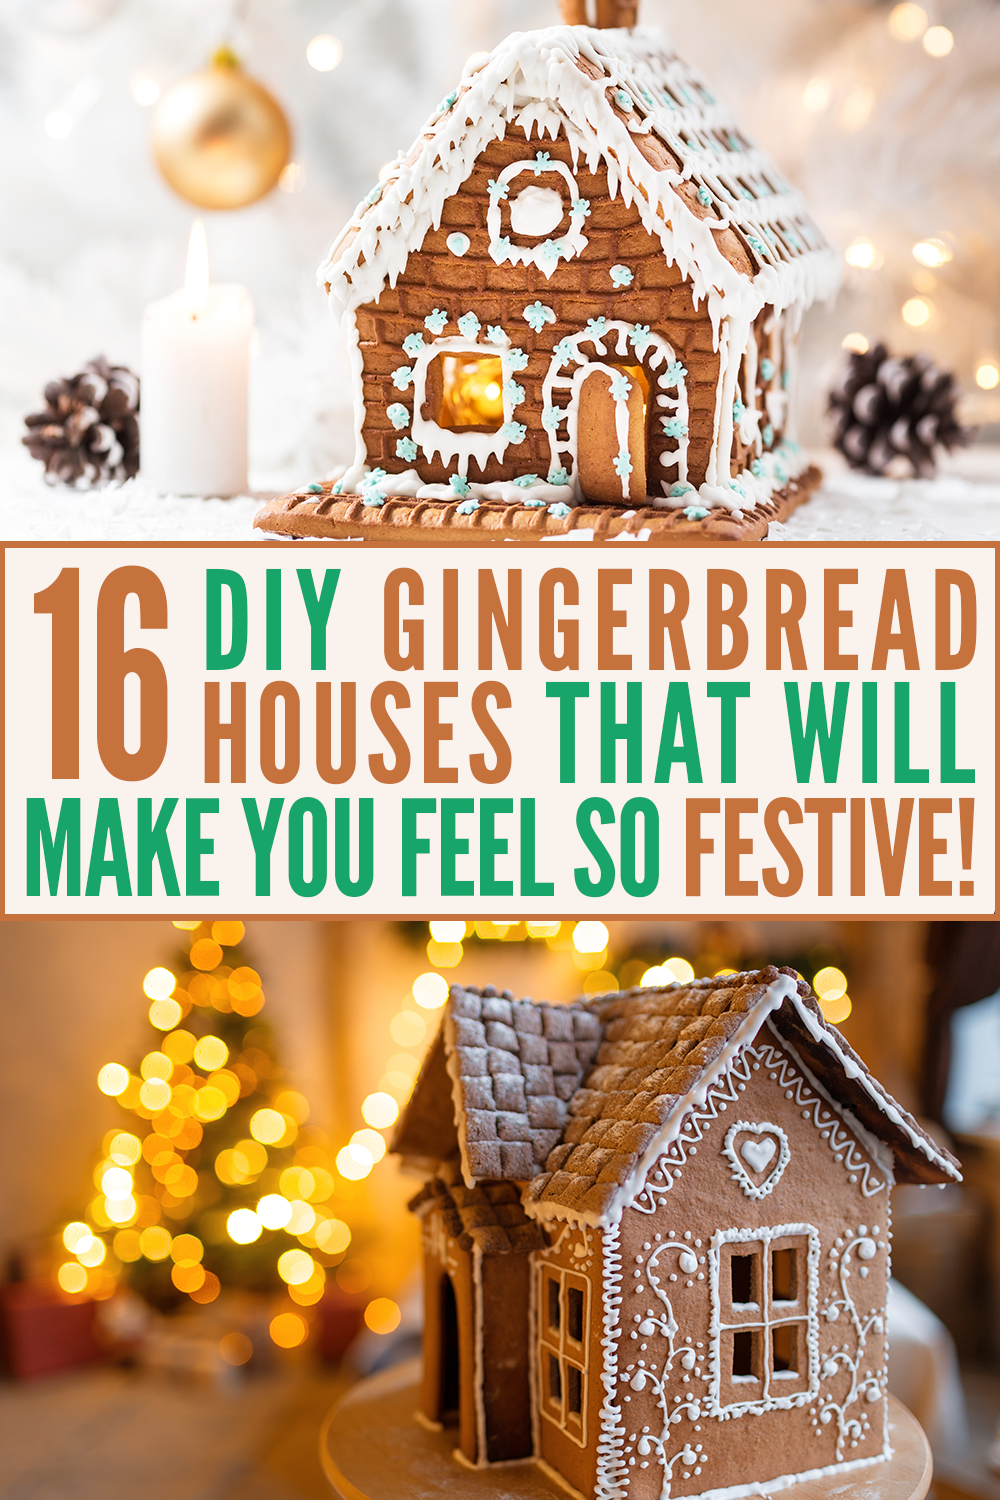 Create Cozy - Home - Create Cozy - Home -   18 ginger bread house decorations christmas gingerbread ideas